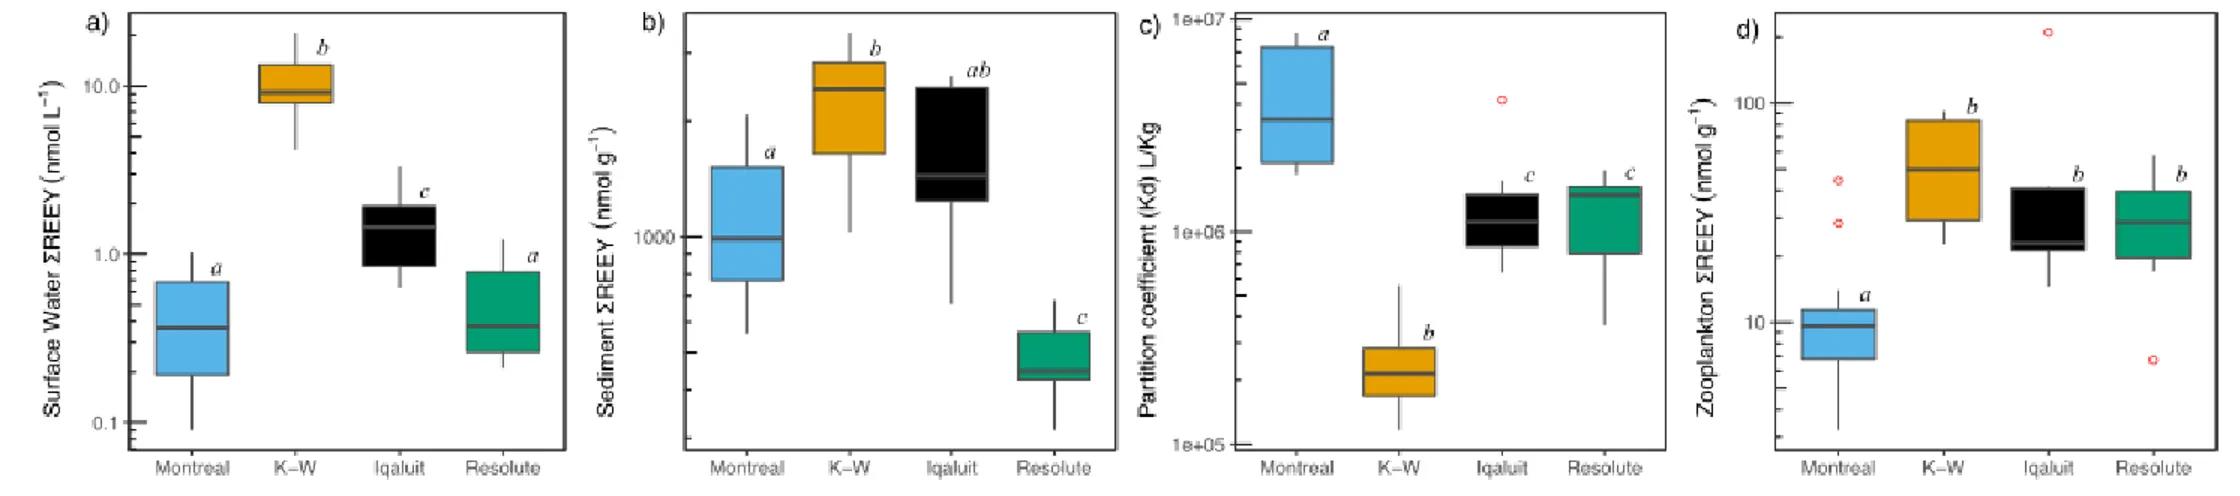 FIGURE 2: Boxplots showing a) ∑REEY concentrations in surface water (log-scaled nmol L -1 ), b) ∑REEY concentrations in surface  sediment (log-scaled nmol g -1 ), c) sediment-water partition coefficients or Kd (L kg -1 ) and d) ∑REEY concentrations in bulk